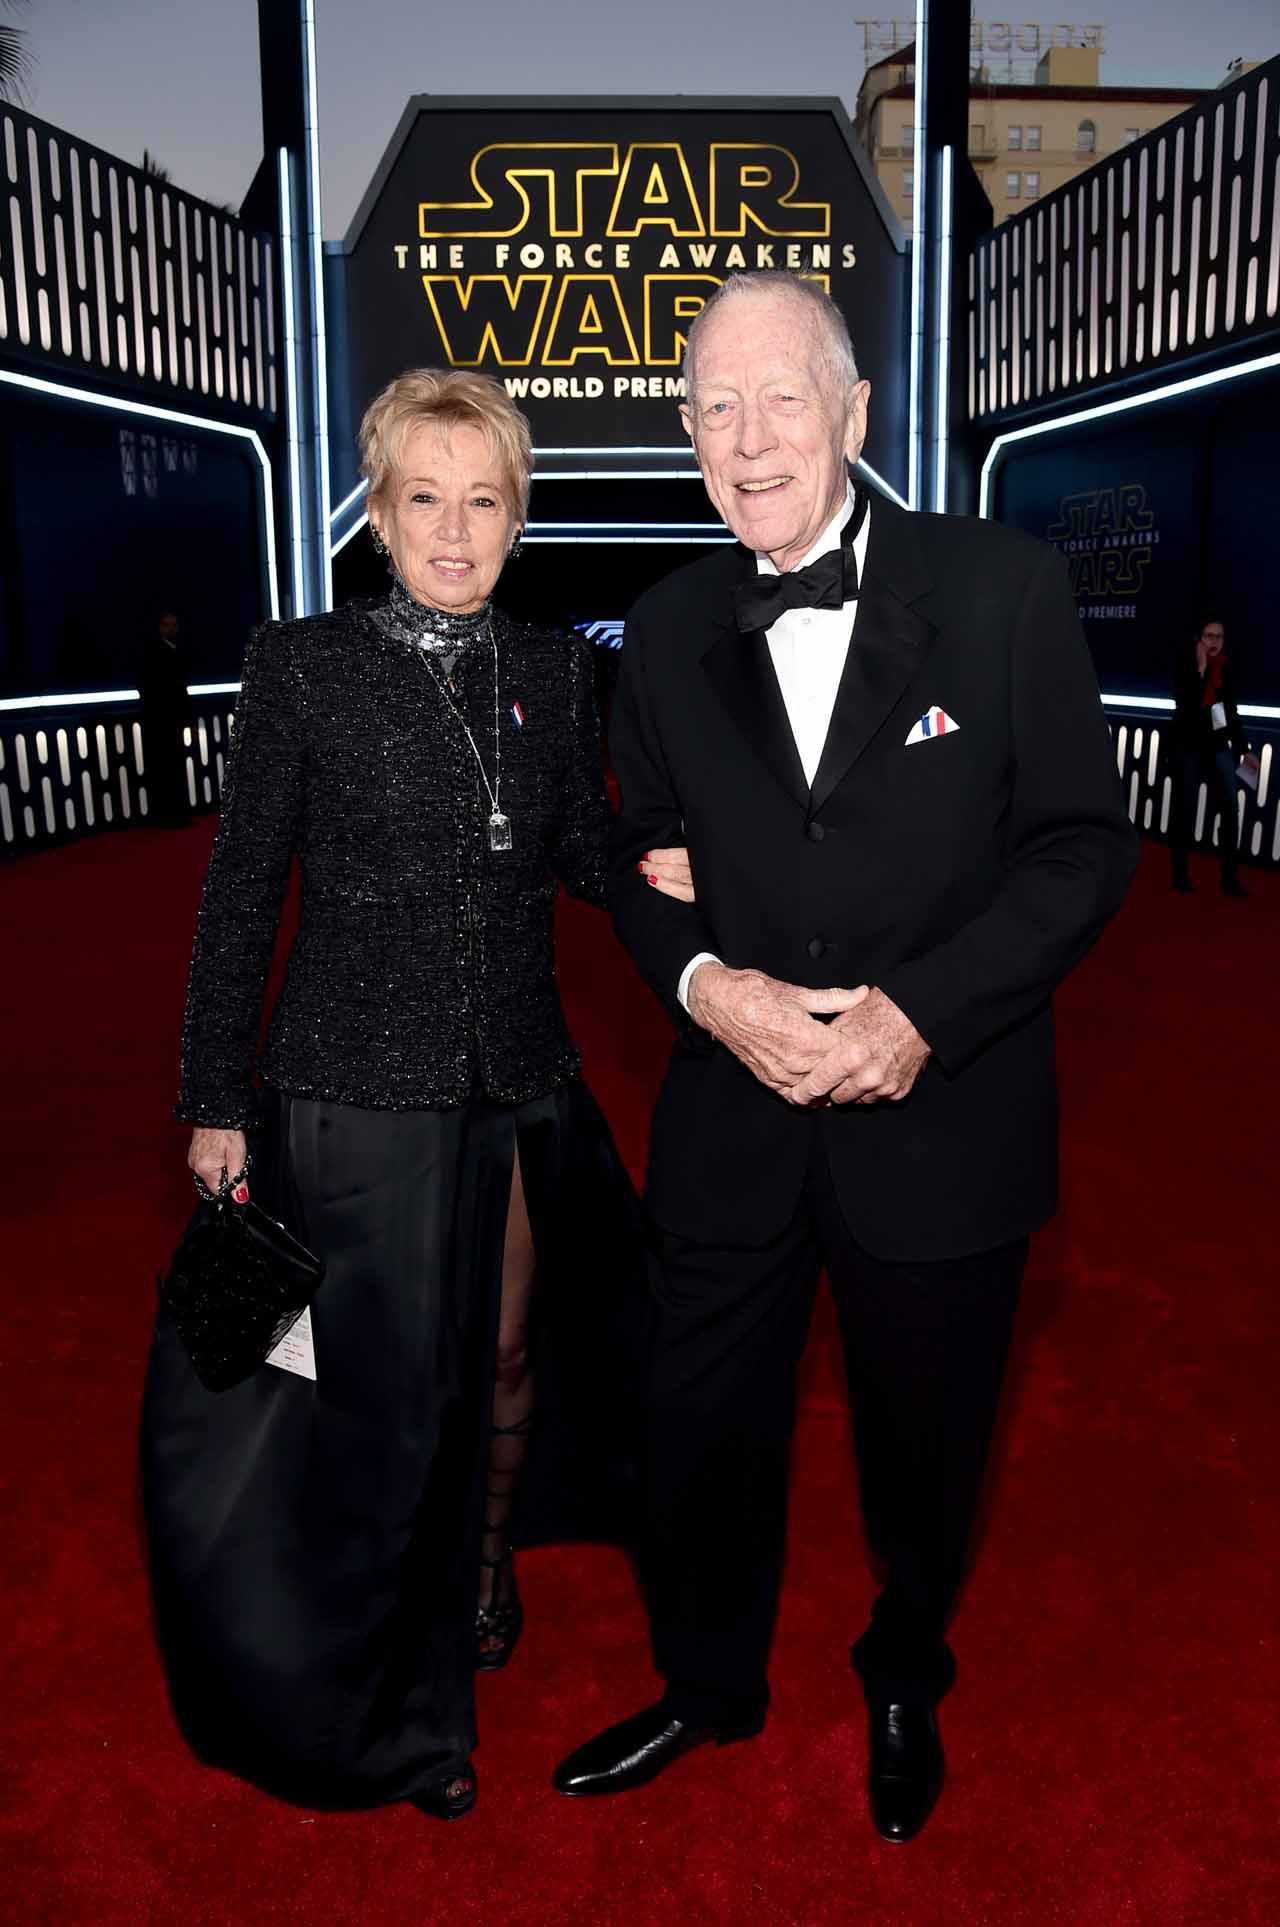 HOLLYWOOD, CA - DECEMBER 14:  Producer Catherine Brelet (L) and actor Max von Sydow attend the World Premiere of ?Star Wars: The Force Awakens? at the Dolby, El Capitan, and TCL Theatres on December 14, 2015 in Hollywood, California.  (Photo by Alberto E. Rodriguez/Getty Images for Disney) *** Local Caption *** Max von Sydow;Catherine Brelet